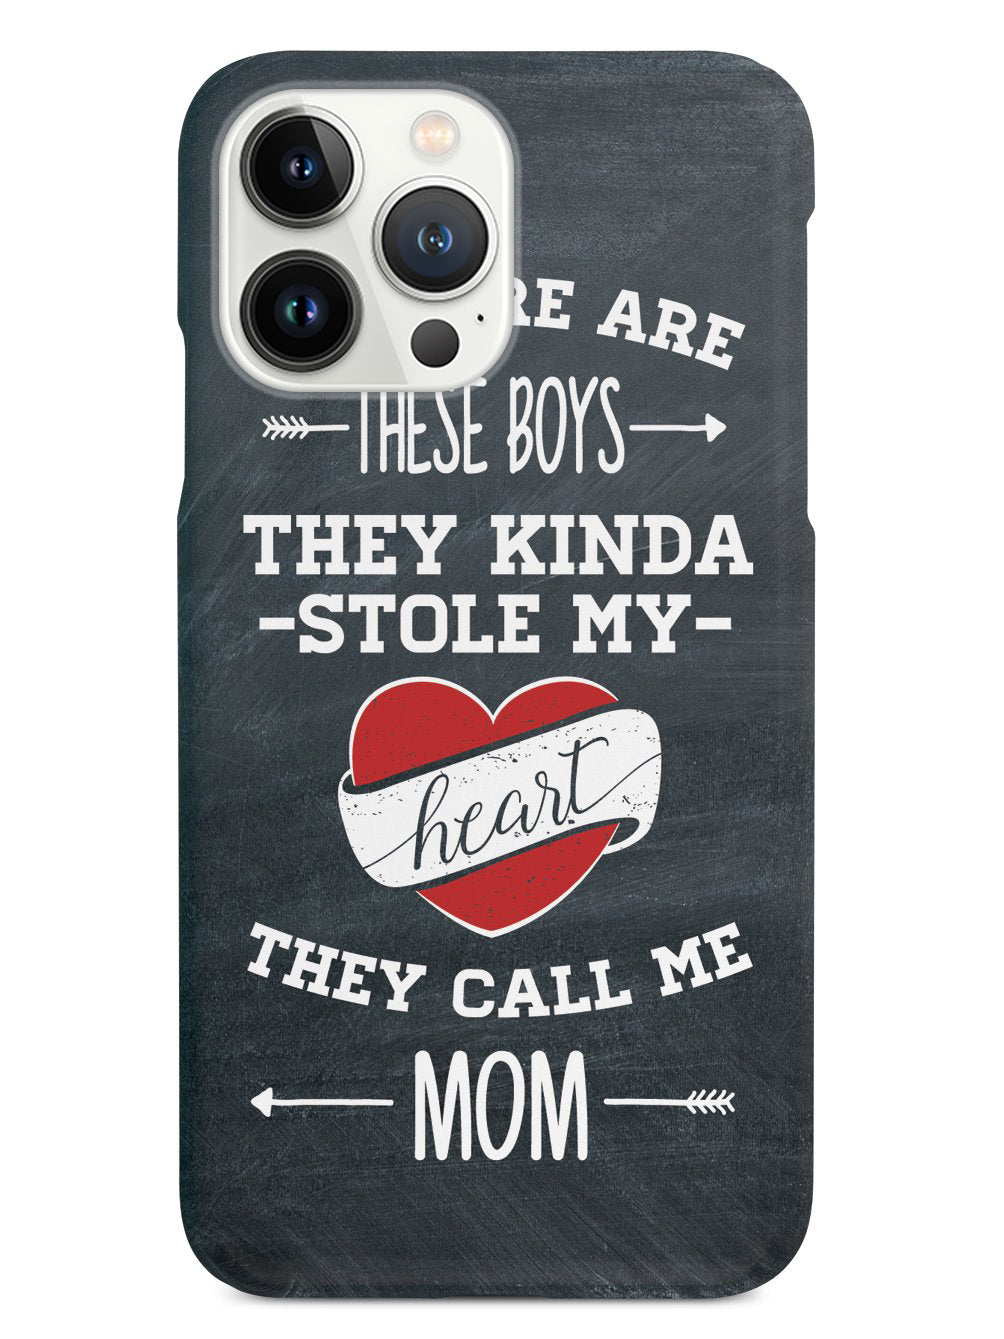 So There Are These Boys - Mom Case